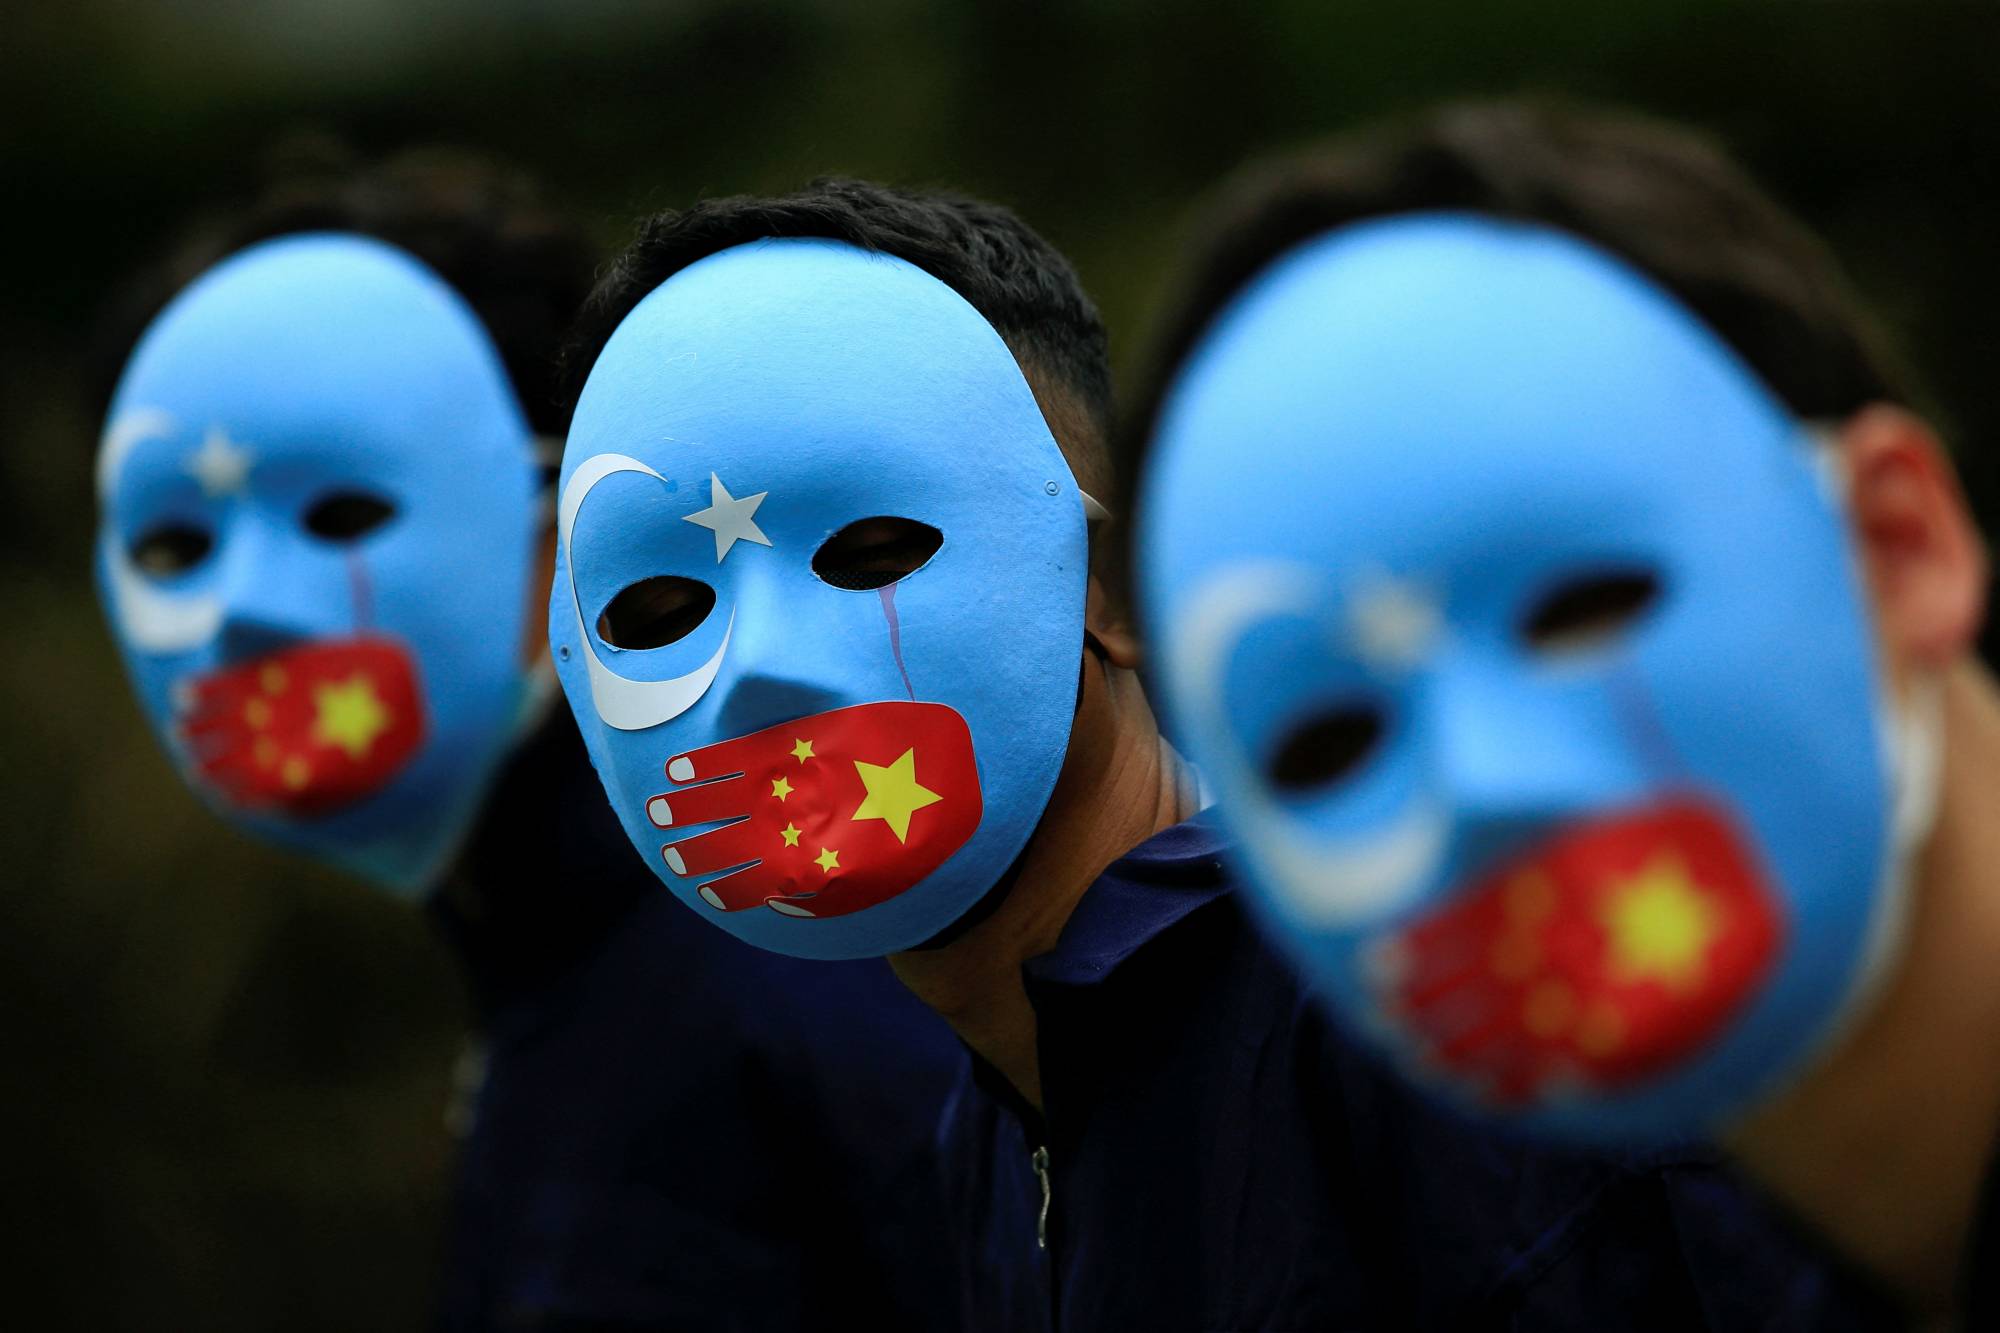 Activists take part in a protest against China's treatment of ethnic Uyghur people and call for a boycott of the 2022 Winter Olympics in Beijing, at a park in Jakarta on Jan. 4. | REUTERS